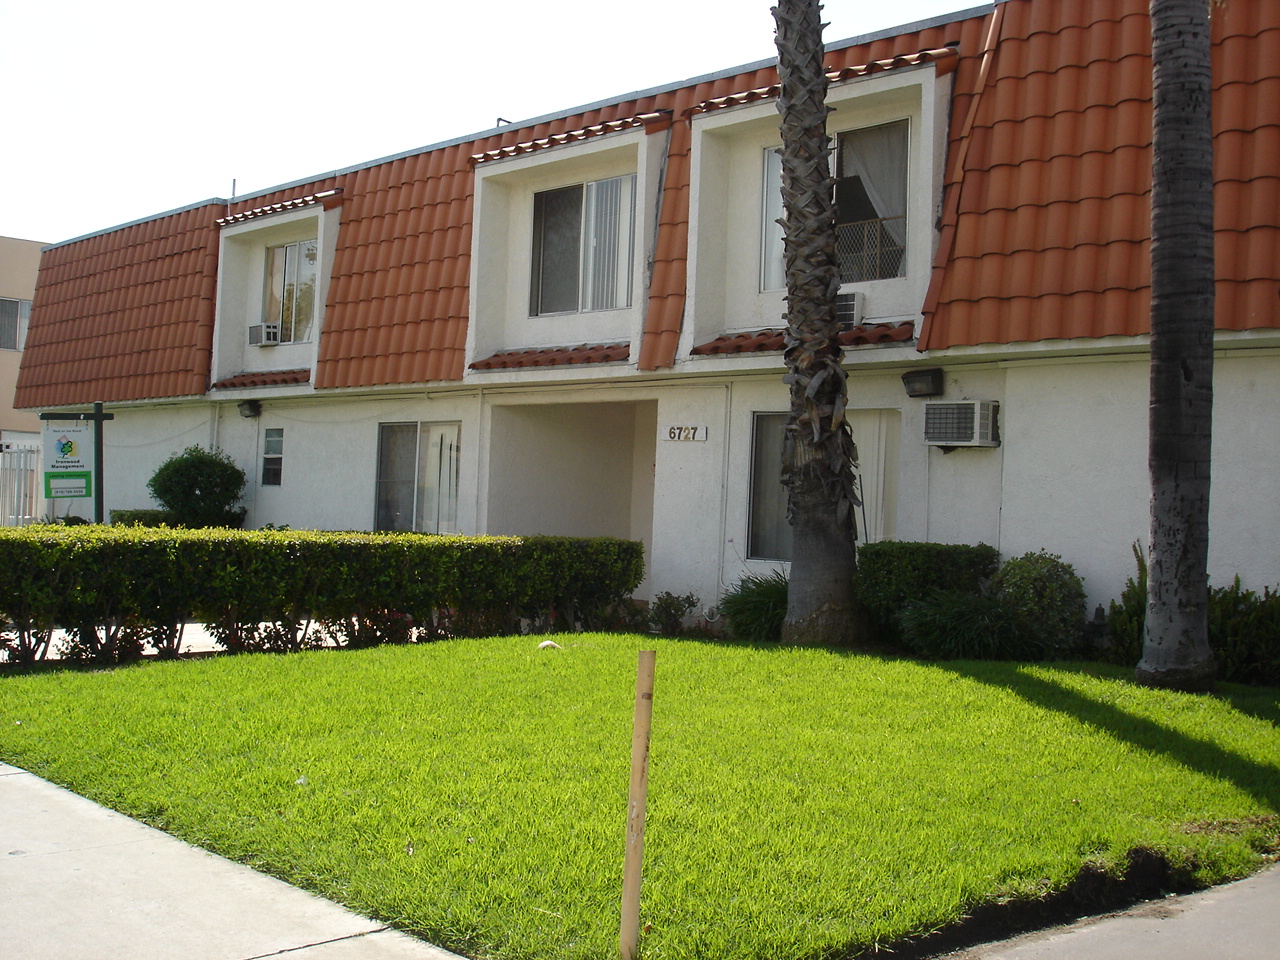 White 2 floor building with red roof tile, grass, bushes and trees in front area. Some units with a/c